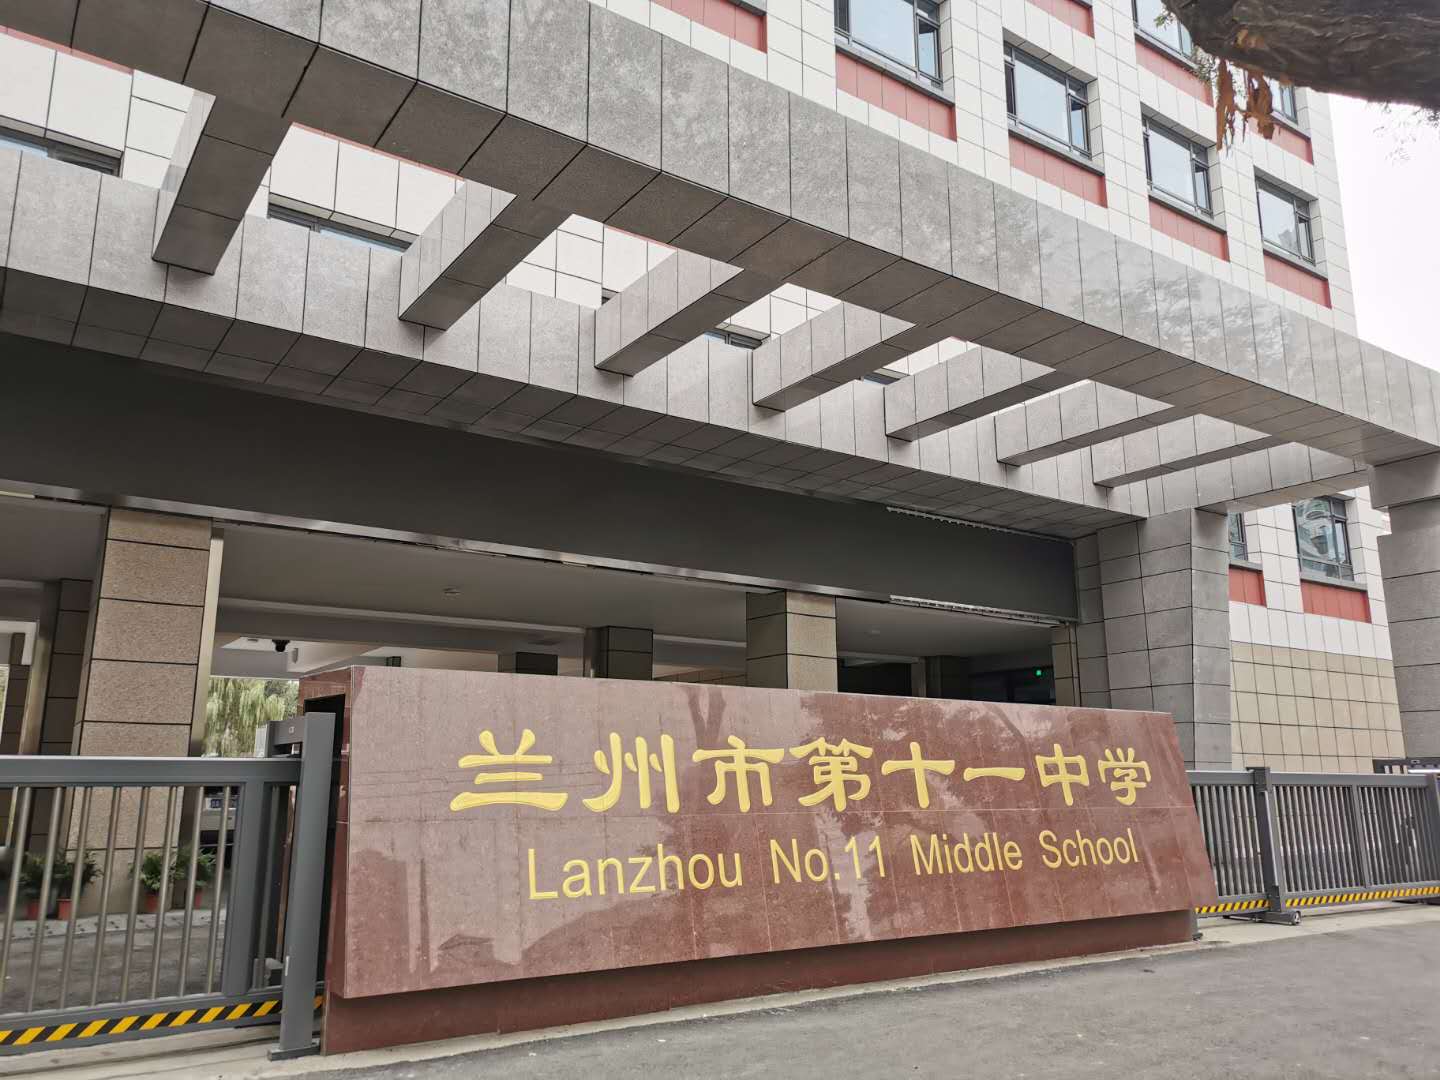 Case Sharing【DSPPA IP Network PA System】Lanzhou No.11 Middle School